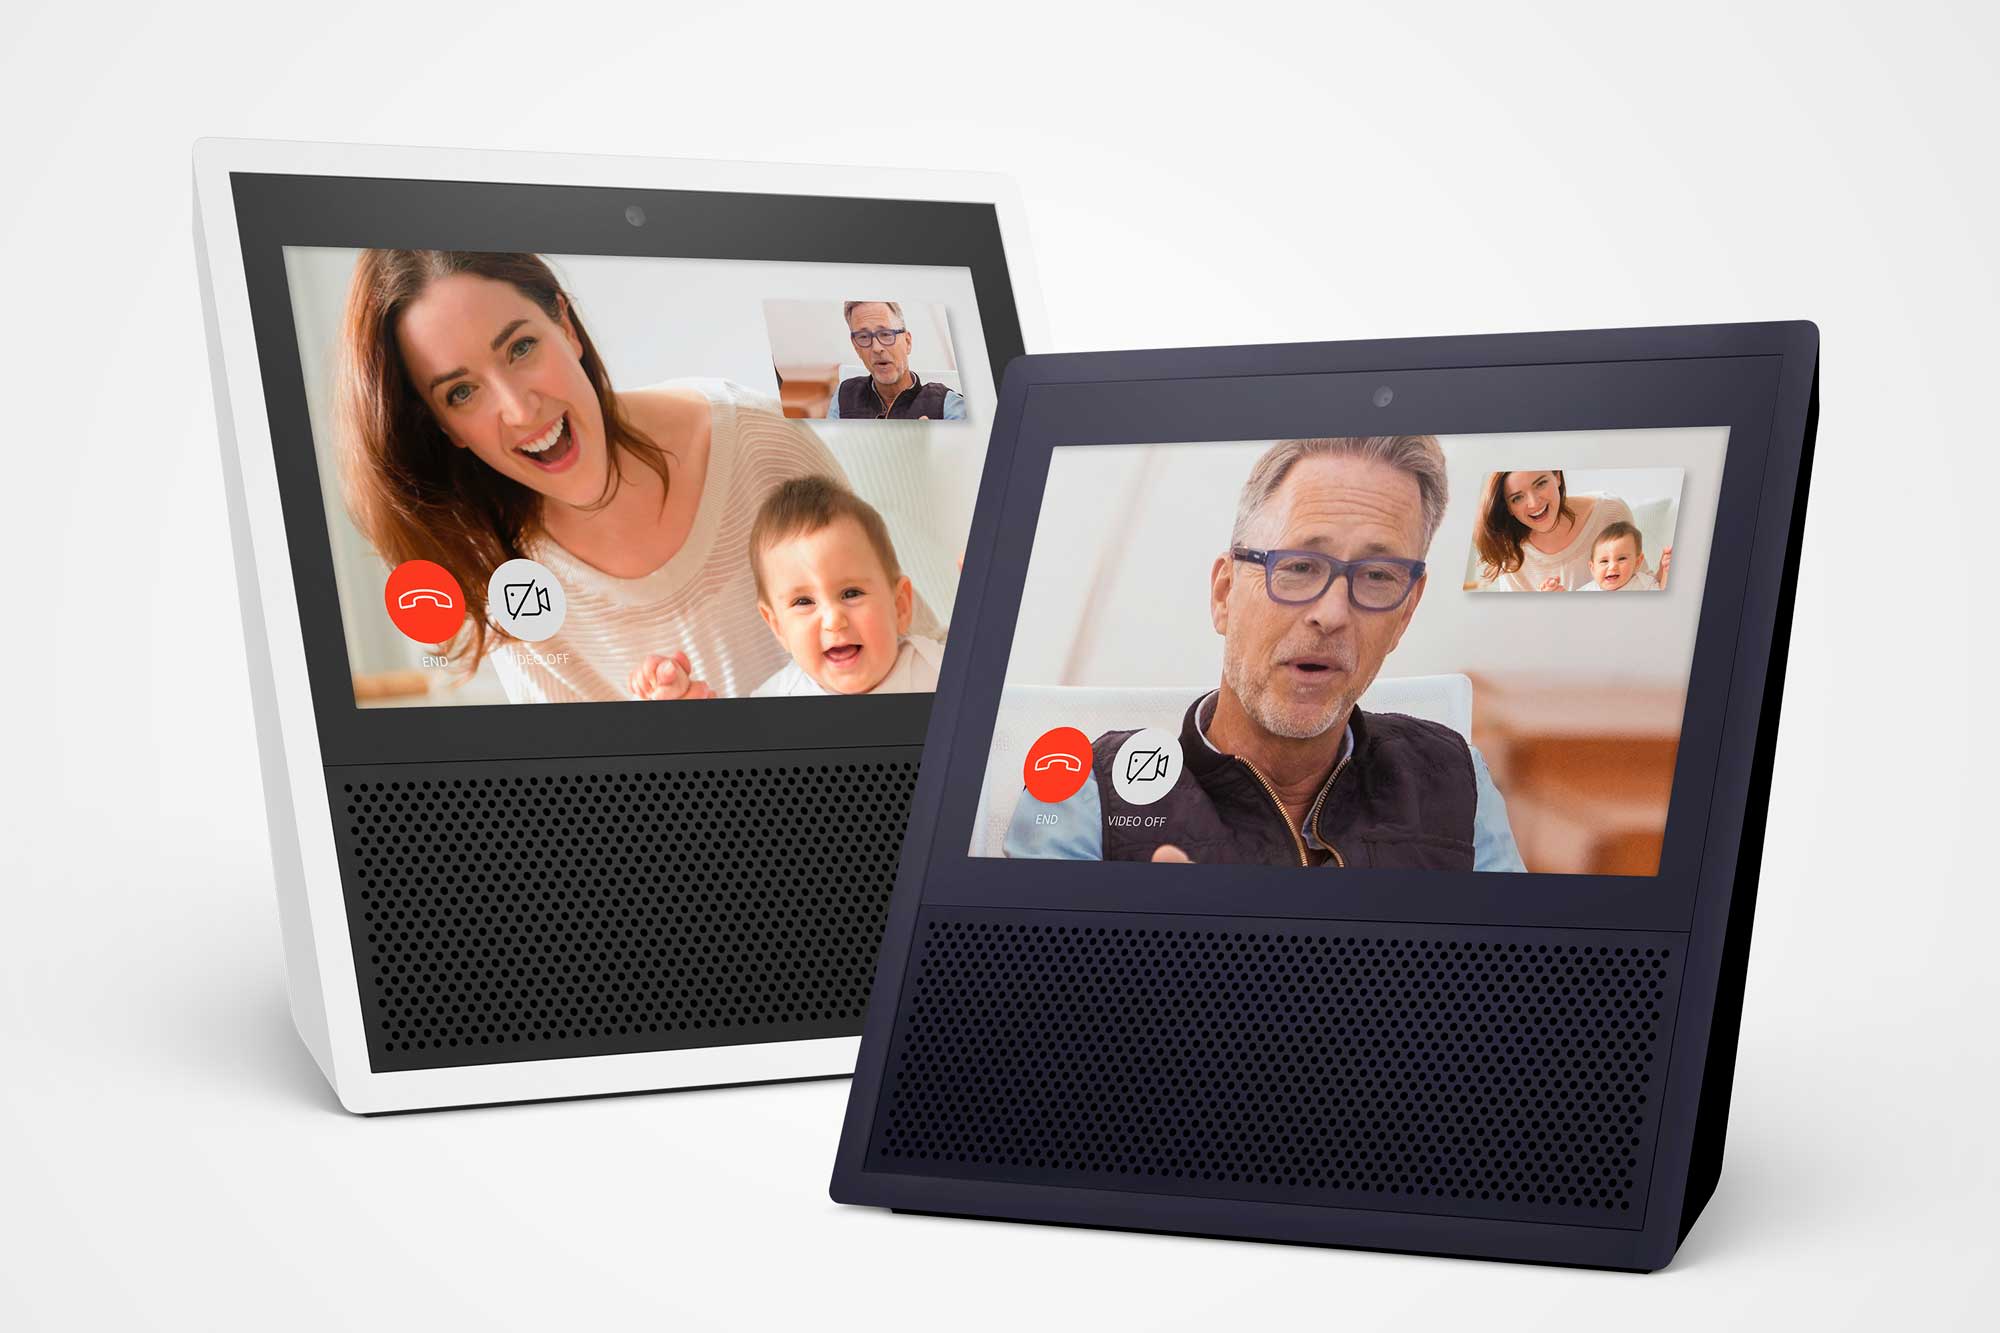 Amazon Echo Show drop-in feature is really creepy